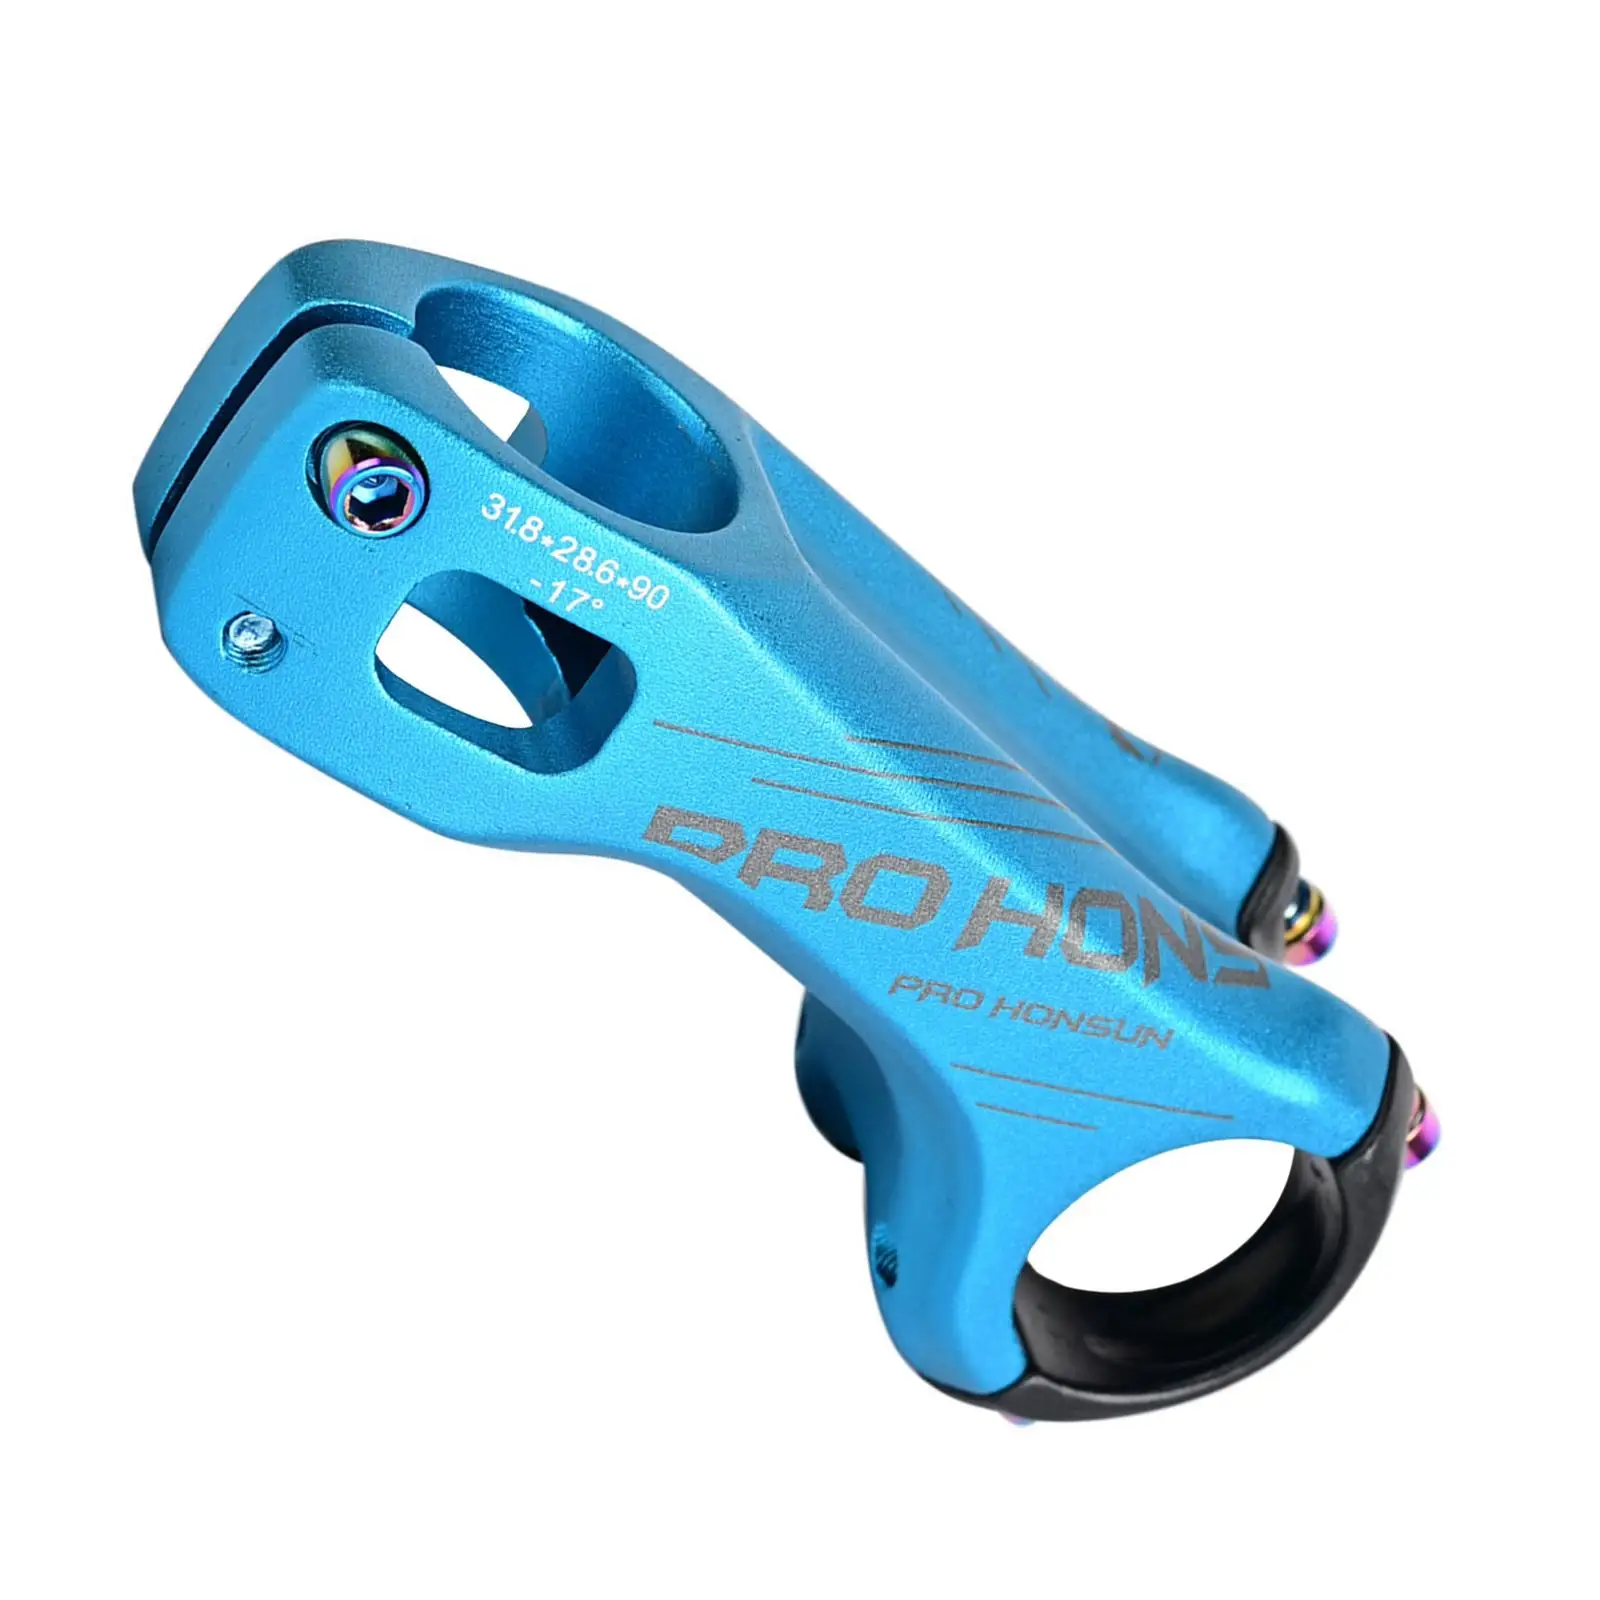 Alloy Bicycle Stem Parts Components 17 Degree Extender 31.8 for Cyclist Gift